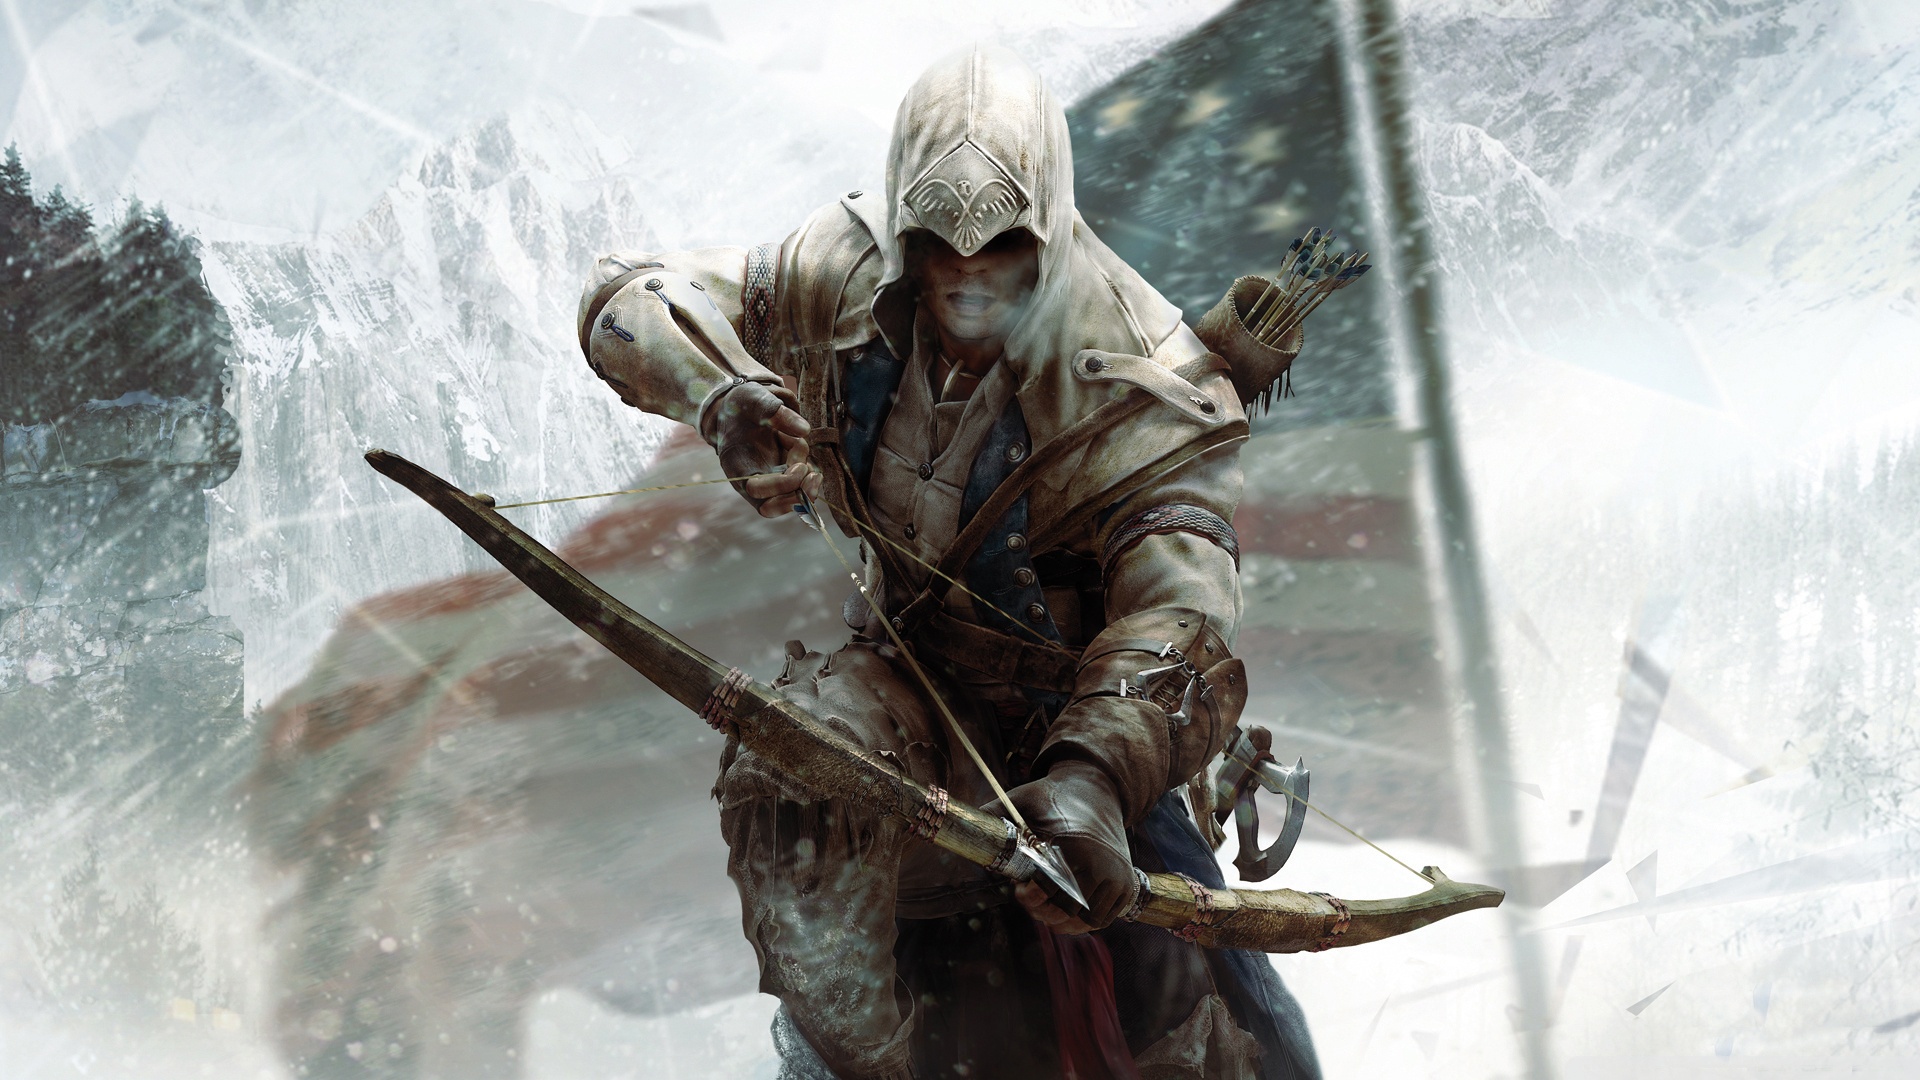 Download Assassins Creed 3 wallpaper by nikhilnikki987  19  Free on  ZEDGE now Browse mil  Assassins creed wallpaper Assassins creed hd  Iphone 7 wallpapers